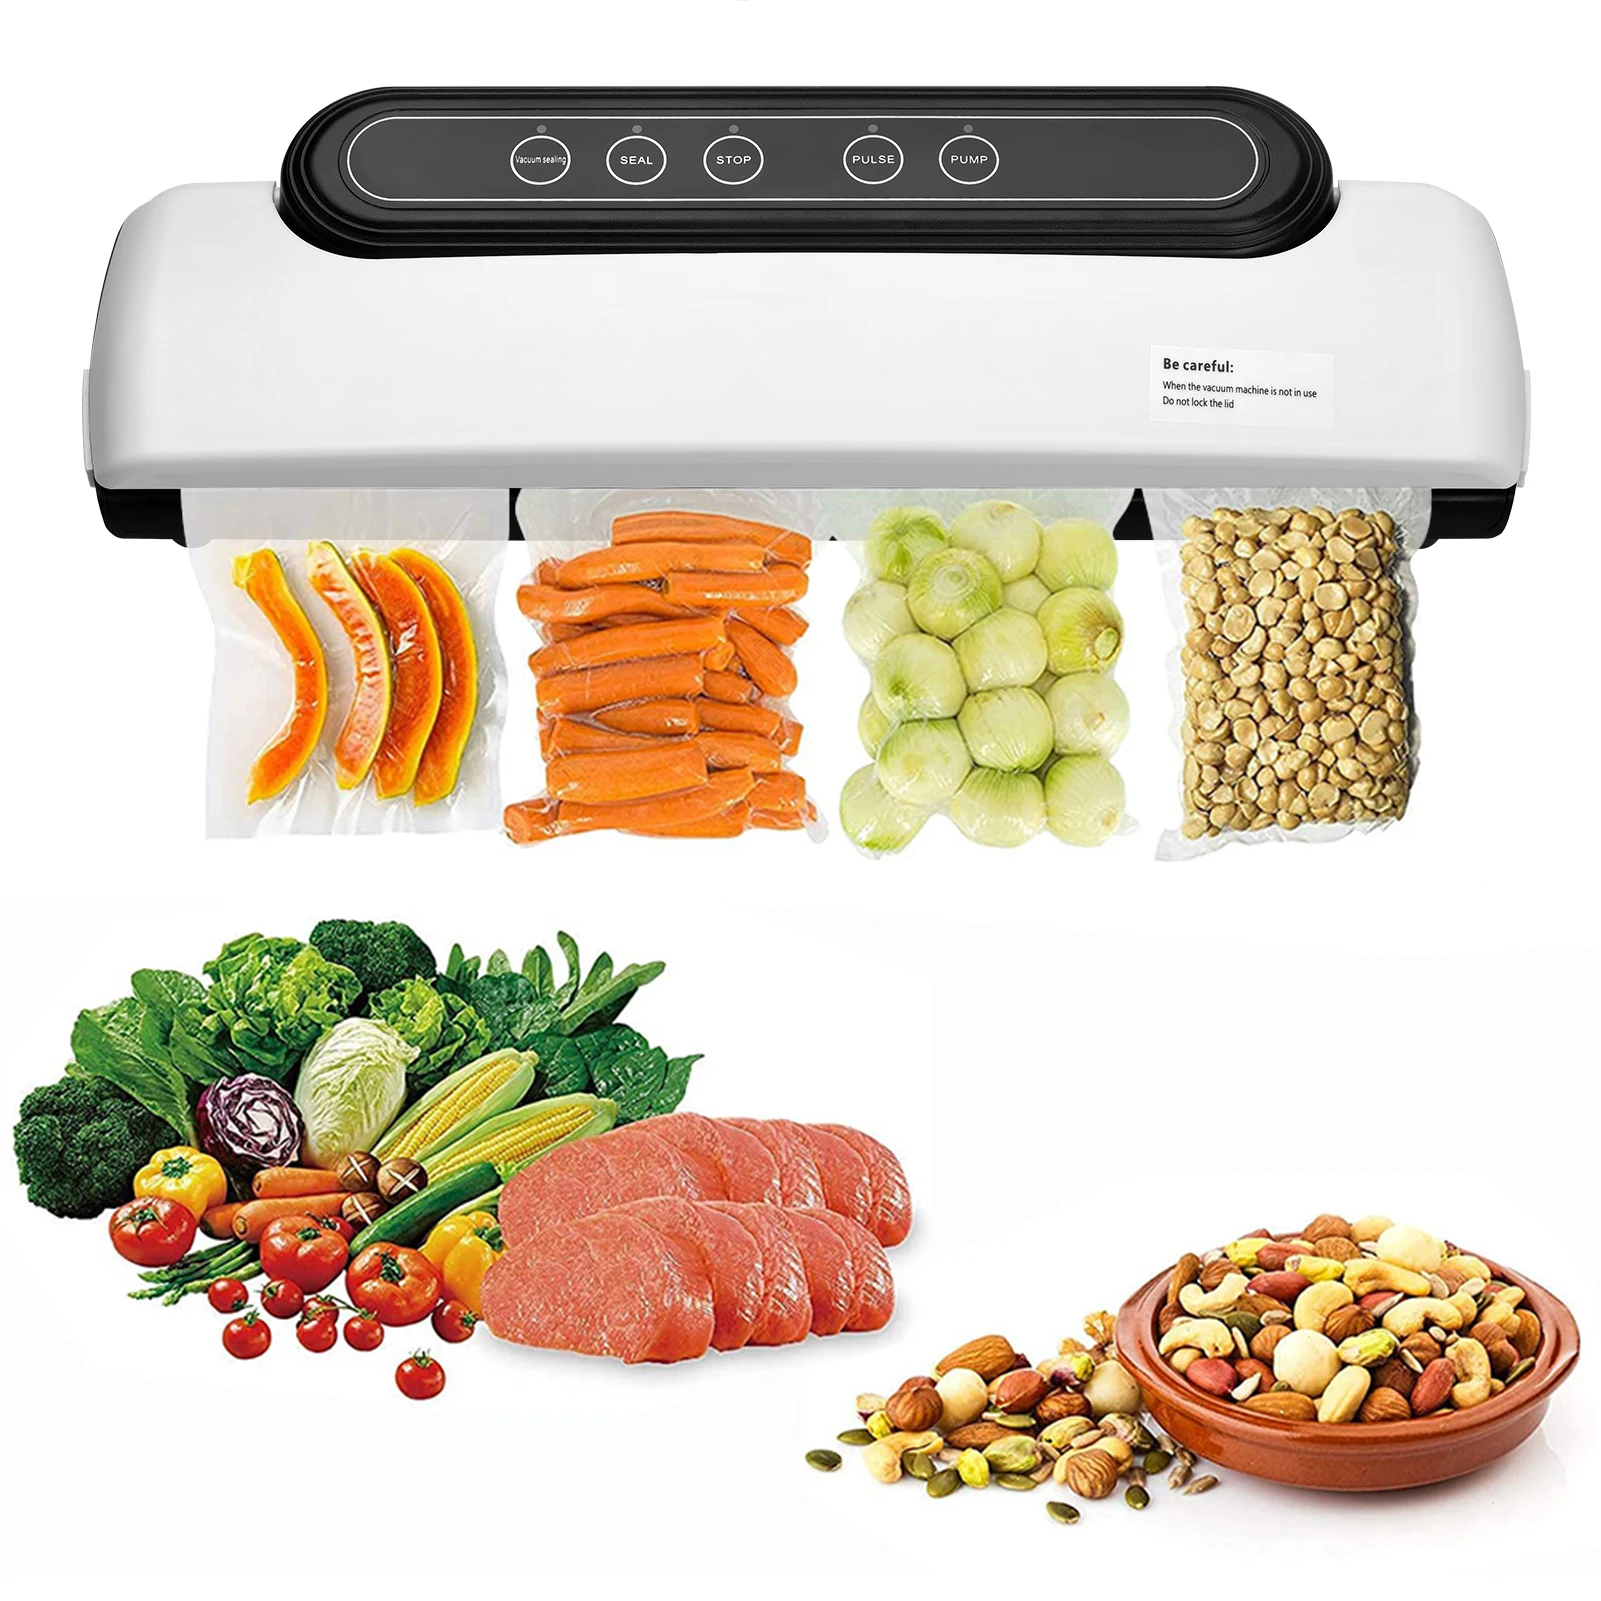 

Vacuum Sealer Machine for Food Preservation Dry & Moist Food Saver with 10 Vacuum Bags for Meat Beef Vegetables Fruits Snack